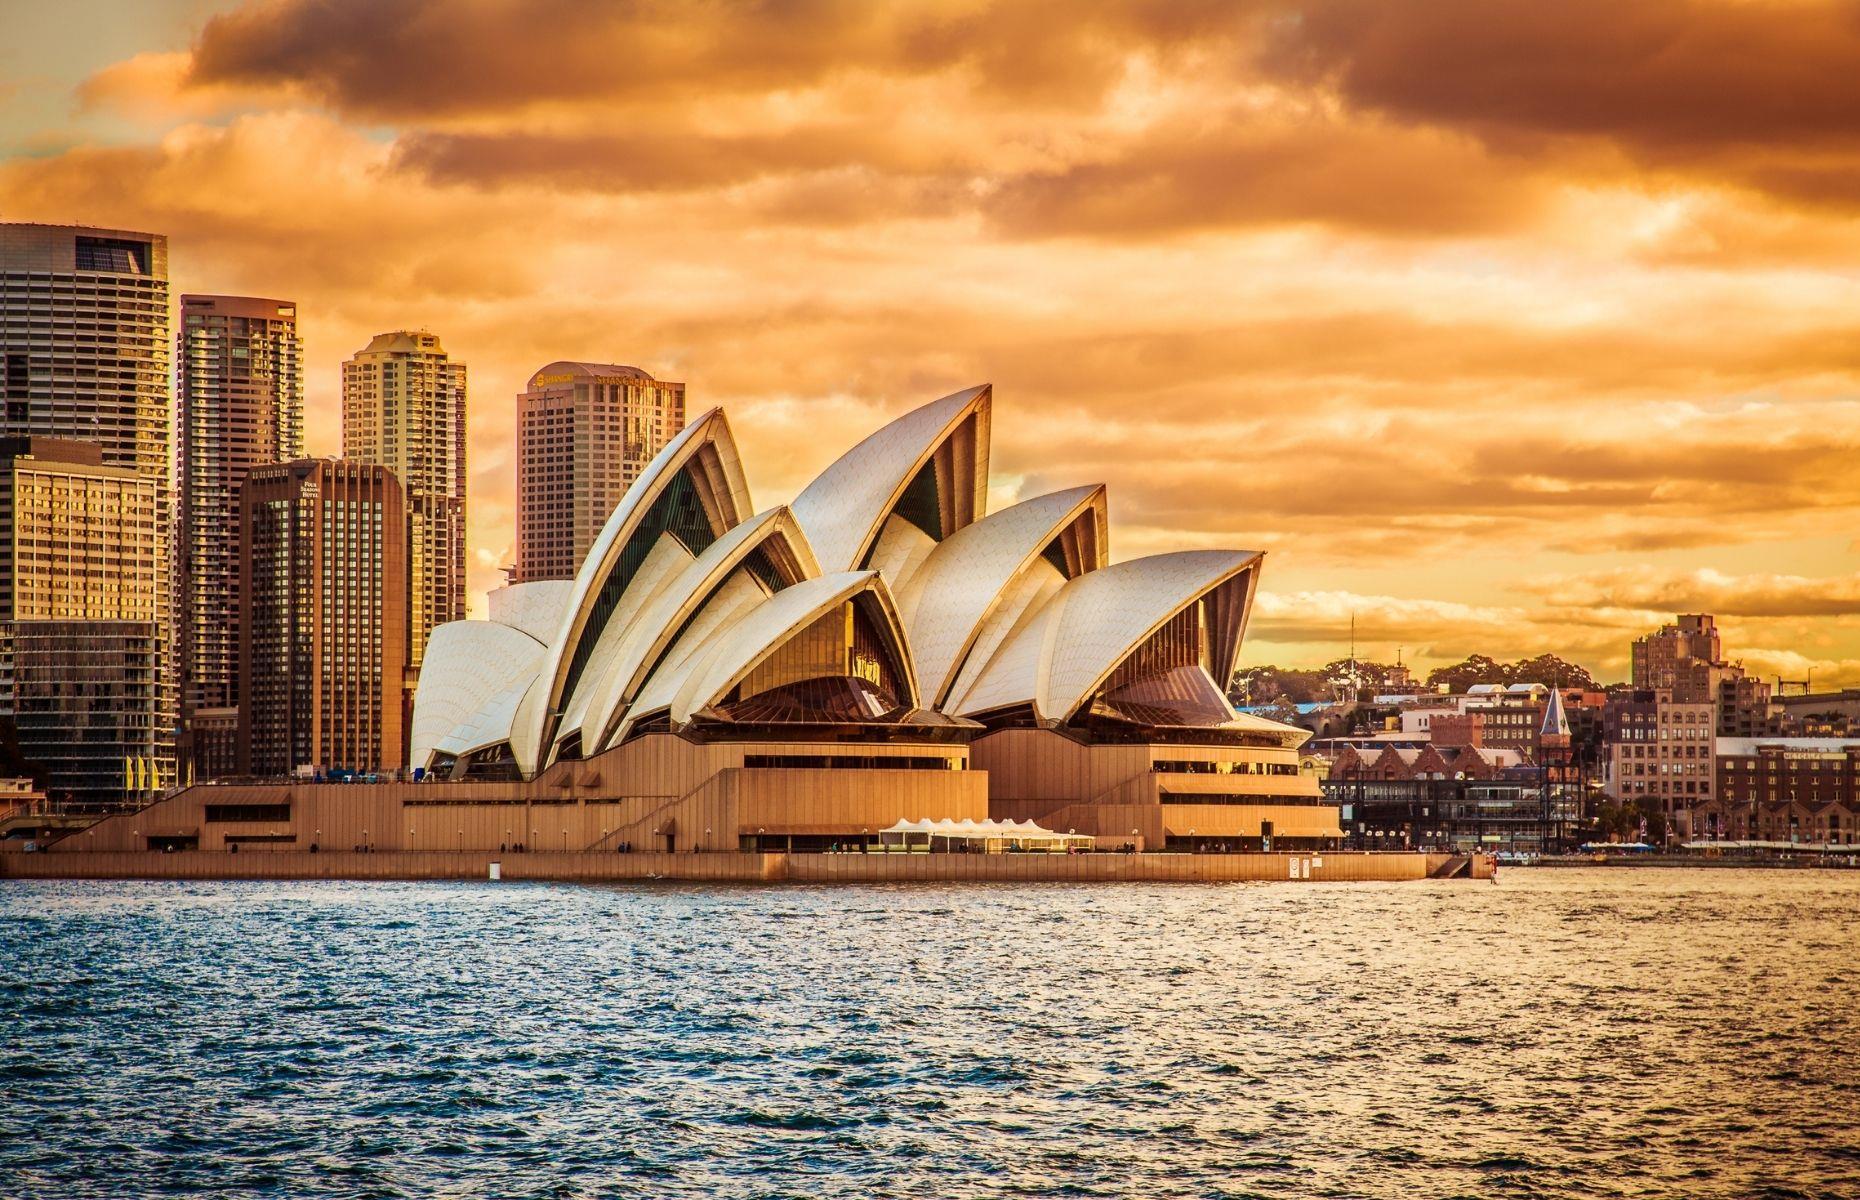 <p>As one of the most iconic and recognizable buildings in the world, the Sydney Opera House is a marvel of modern architecture. The performing arts venue overlooks the waters of Sydney Harbour and has been used as a set for some 65 films and television shows. From <em>Mission: Impossible II</em> to <em>Independence Day</em>, Hollywood clearly has a great love of this distinctive structure. Documentary fans will also remember one daring scene in the 2008 film <em>Man on Wire</em>.</p>  <p><a href="https://www.loveexploring.com/galleryextended/71746/the-secrets-inside-the-worlds-famous-buildings?page=1"><strong>Discover the secrets inside the world's most famous buildings</strong></a></p>